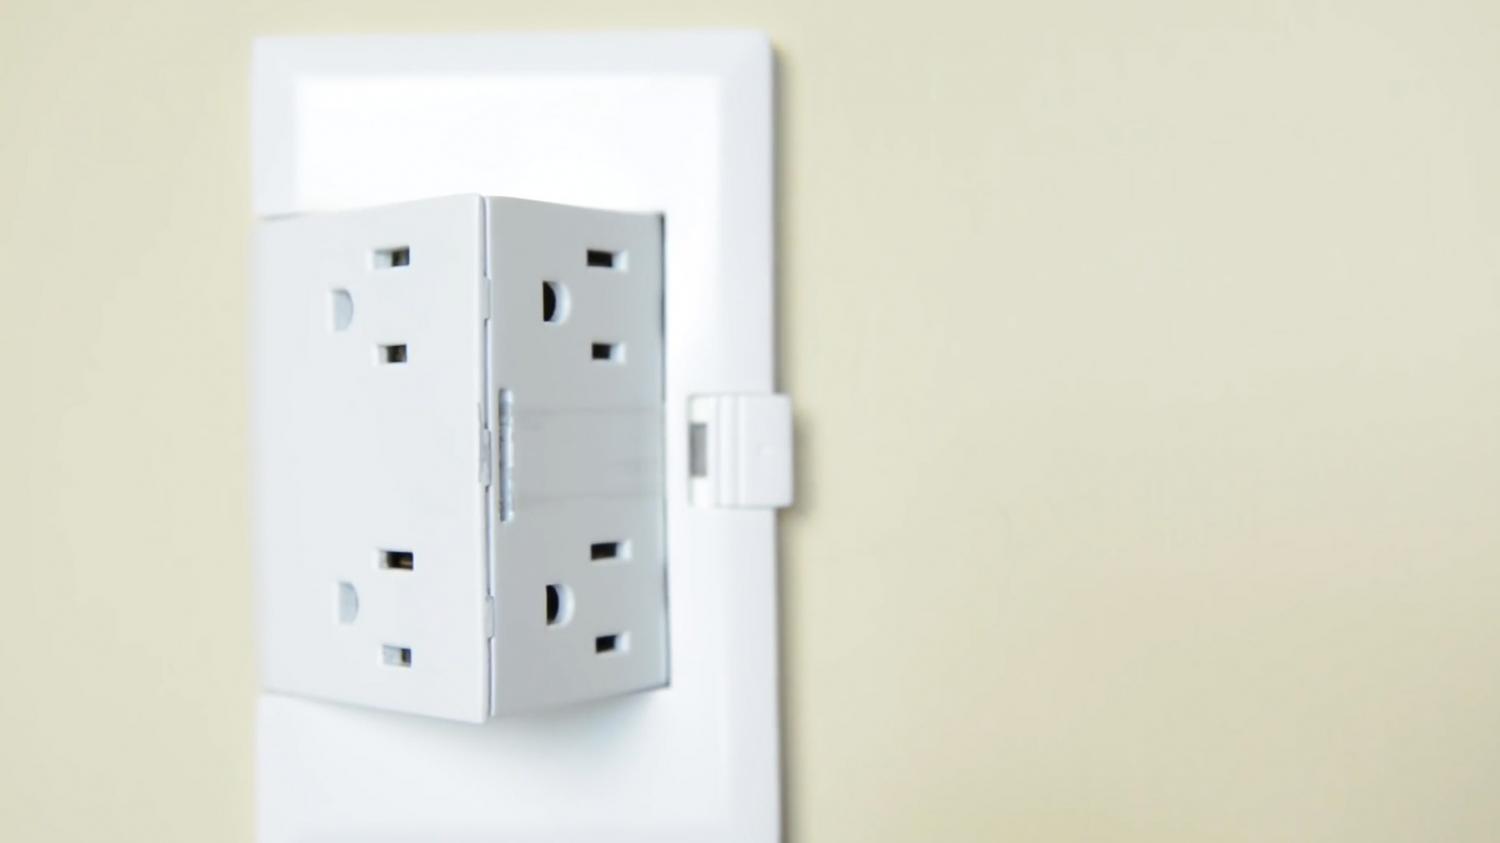 Pop-Out Outlets Double The Number Of Things You Can Plug In - THEOUTLET smart pop-outlets